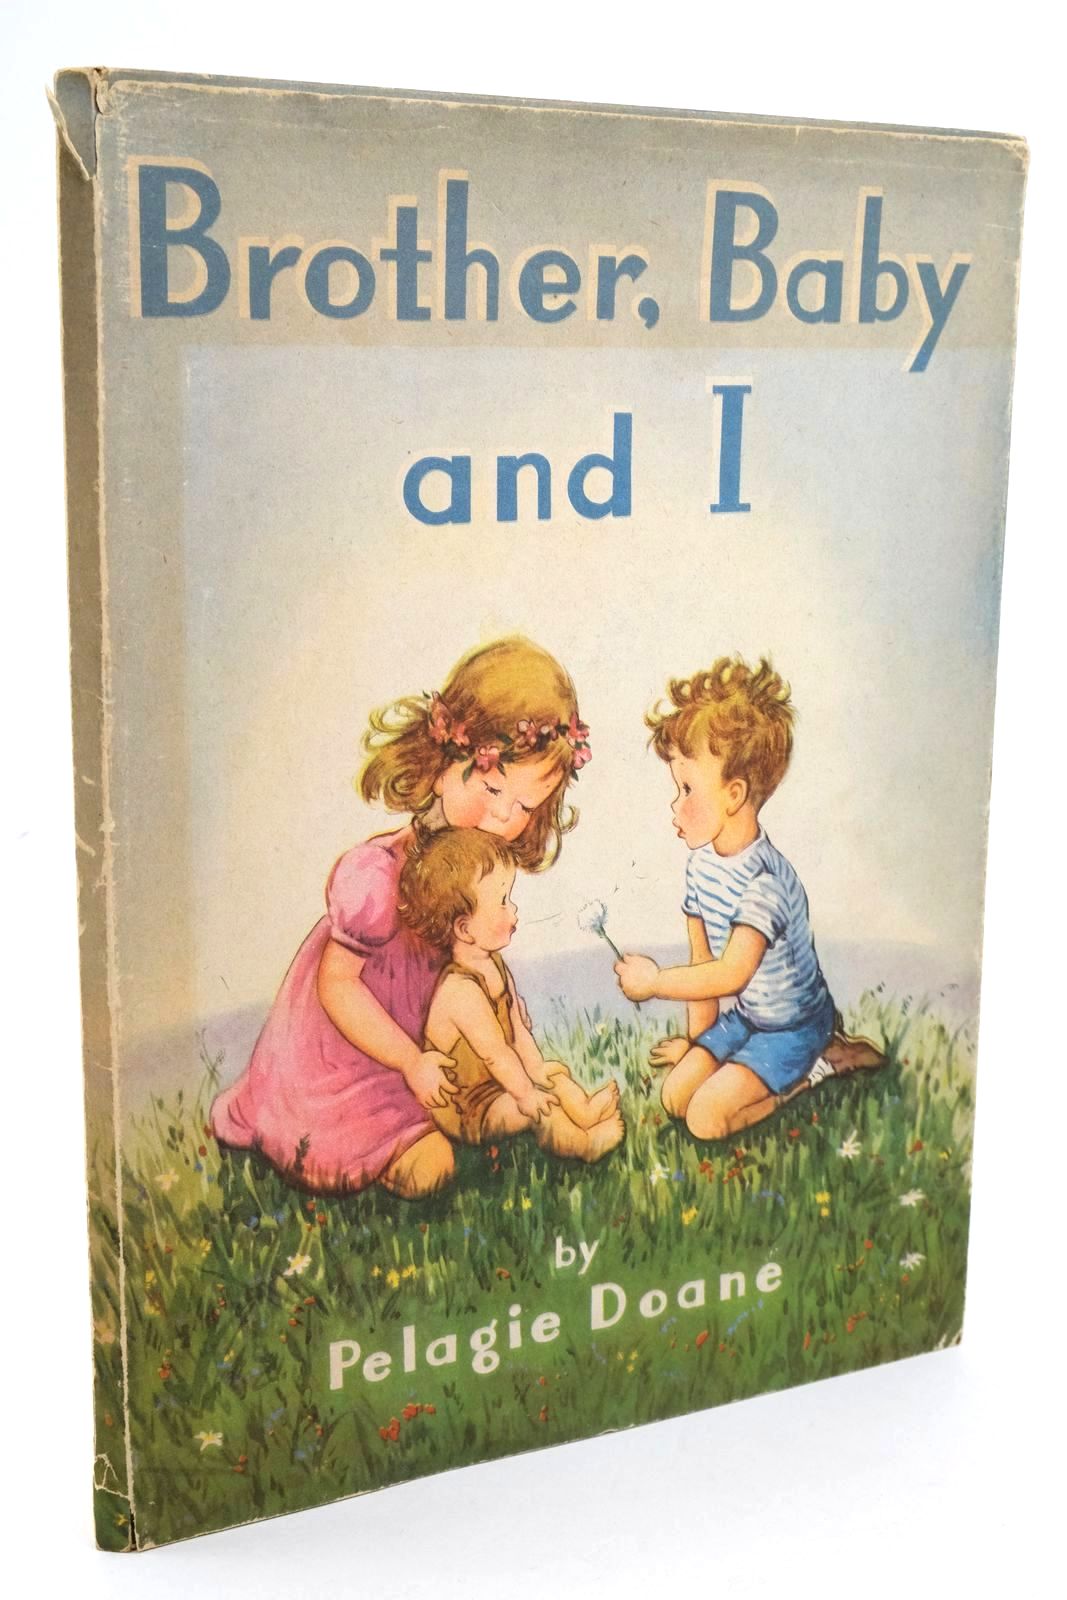 Photo of BROTHER, BABY AND I illustrated by Doane, Pelagie published by Grosset &amp; Dunlap (STOCK CODE: 1322249)  for sale by Stella & Rose's Books